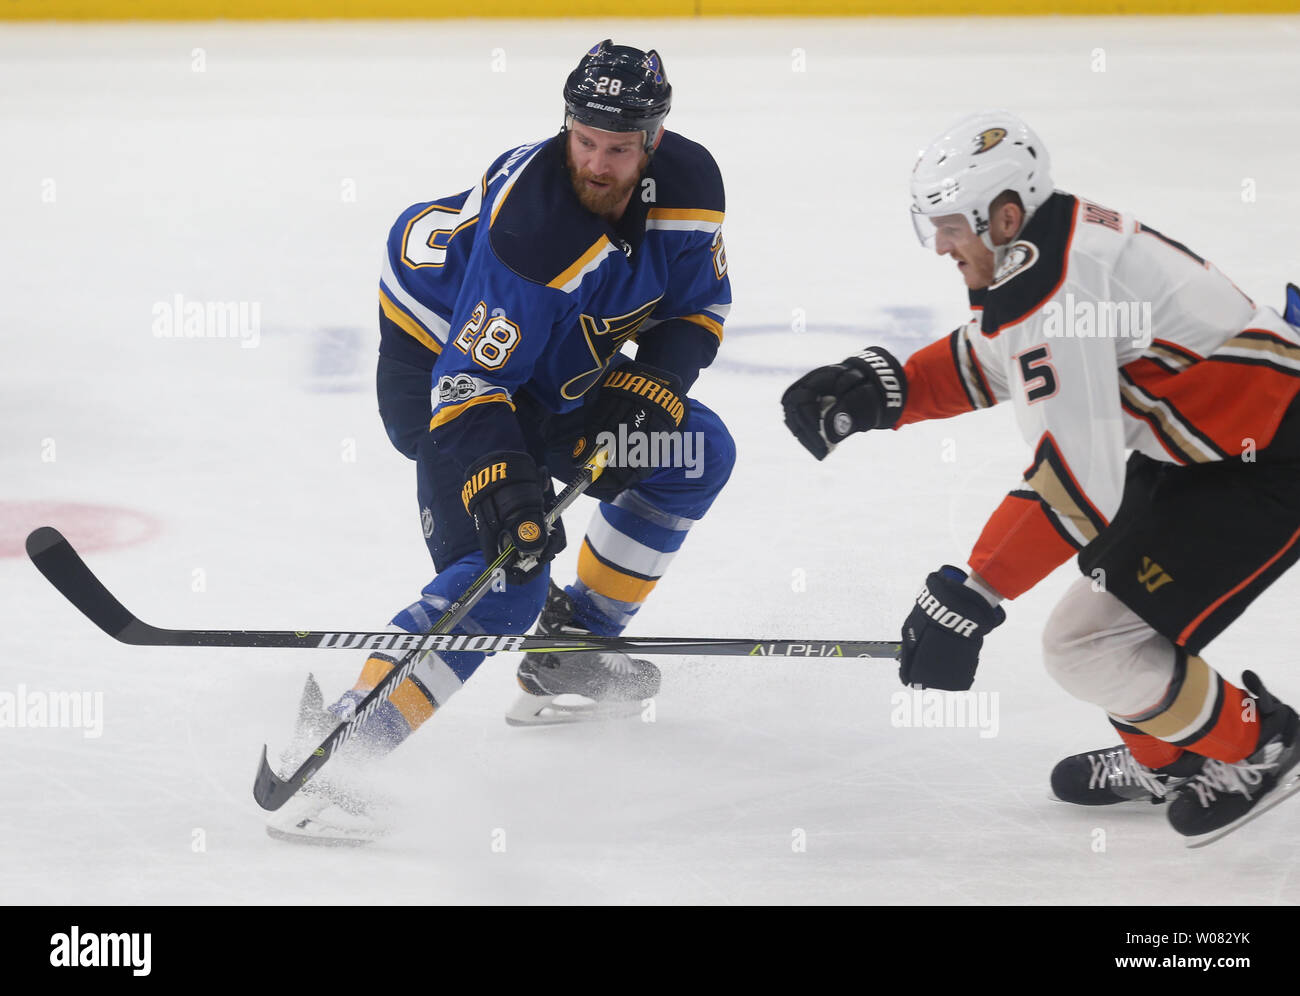 St. Louis Blues Kyle Brodziak and Anaheim Ducks Korbinian Holzer battle for the puck in the first period at the Scottrade Center in St. Louis on November 29, 2017. Photo by Bill Greenblatt/UPI Stock Photo